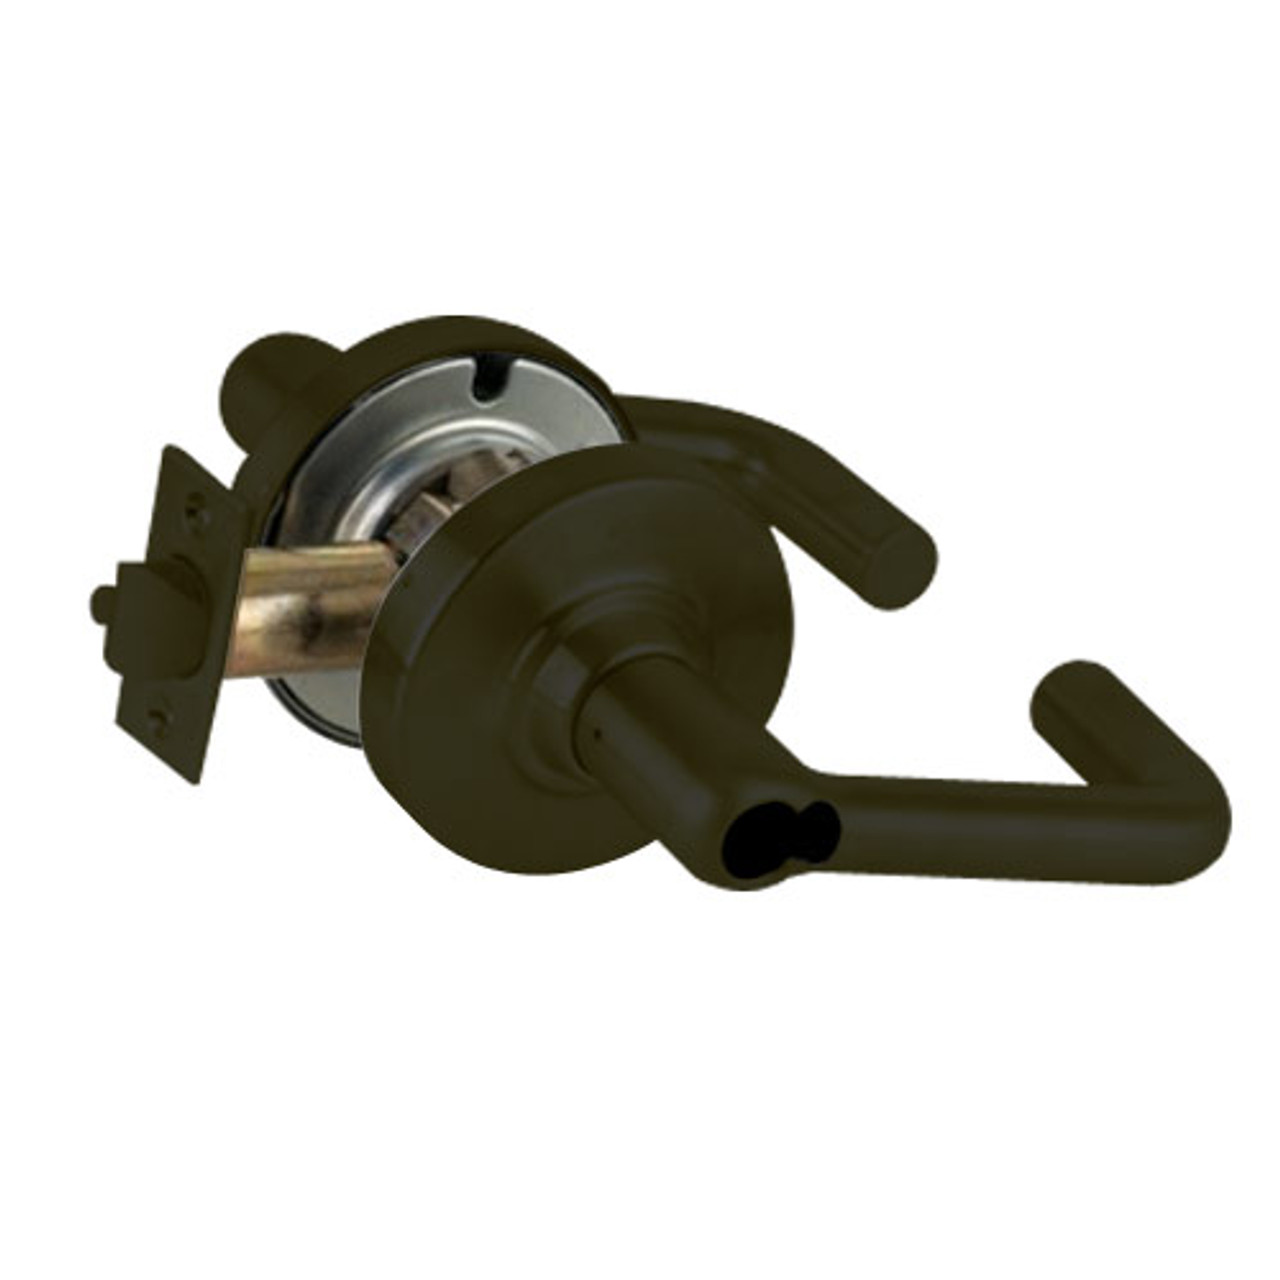 ND60JD-TLR-613 Schlage Tubular Cylindrical Lock in Oil Rubbed Bronze